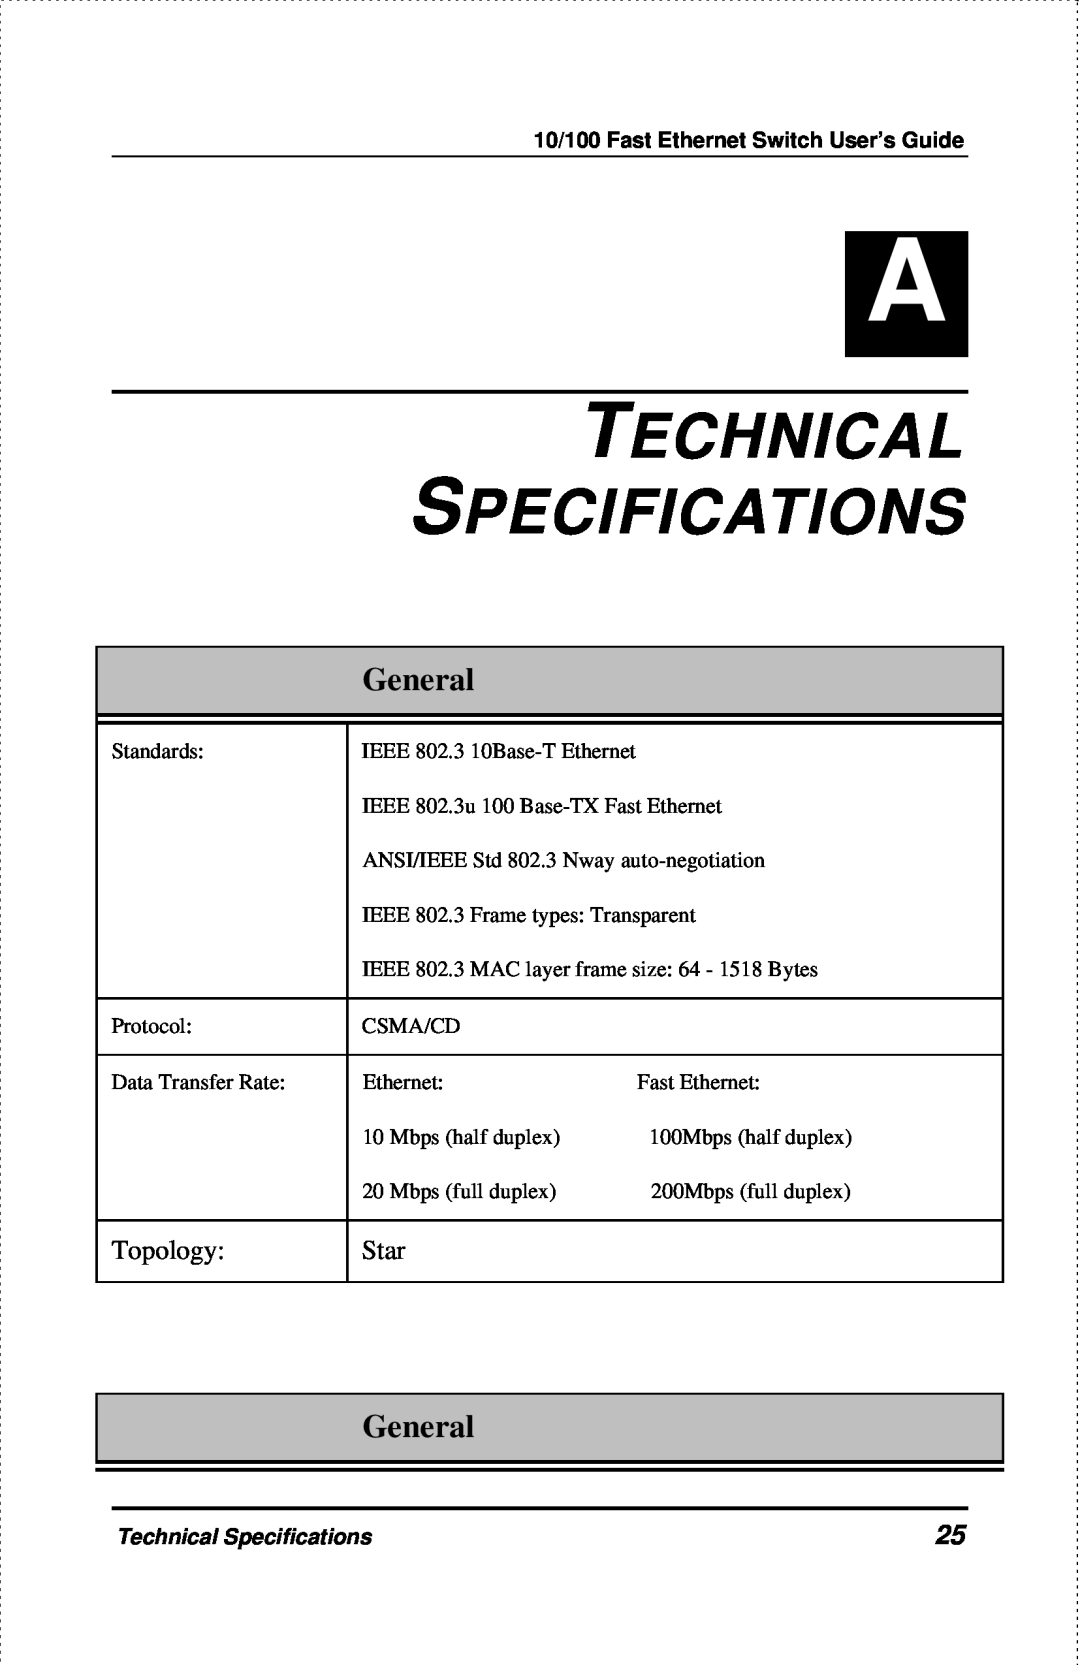 D-Link DES-1004 manual Technical Specifications, General, 10/100 Fast Ethernet Switch User’s Guide 